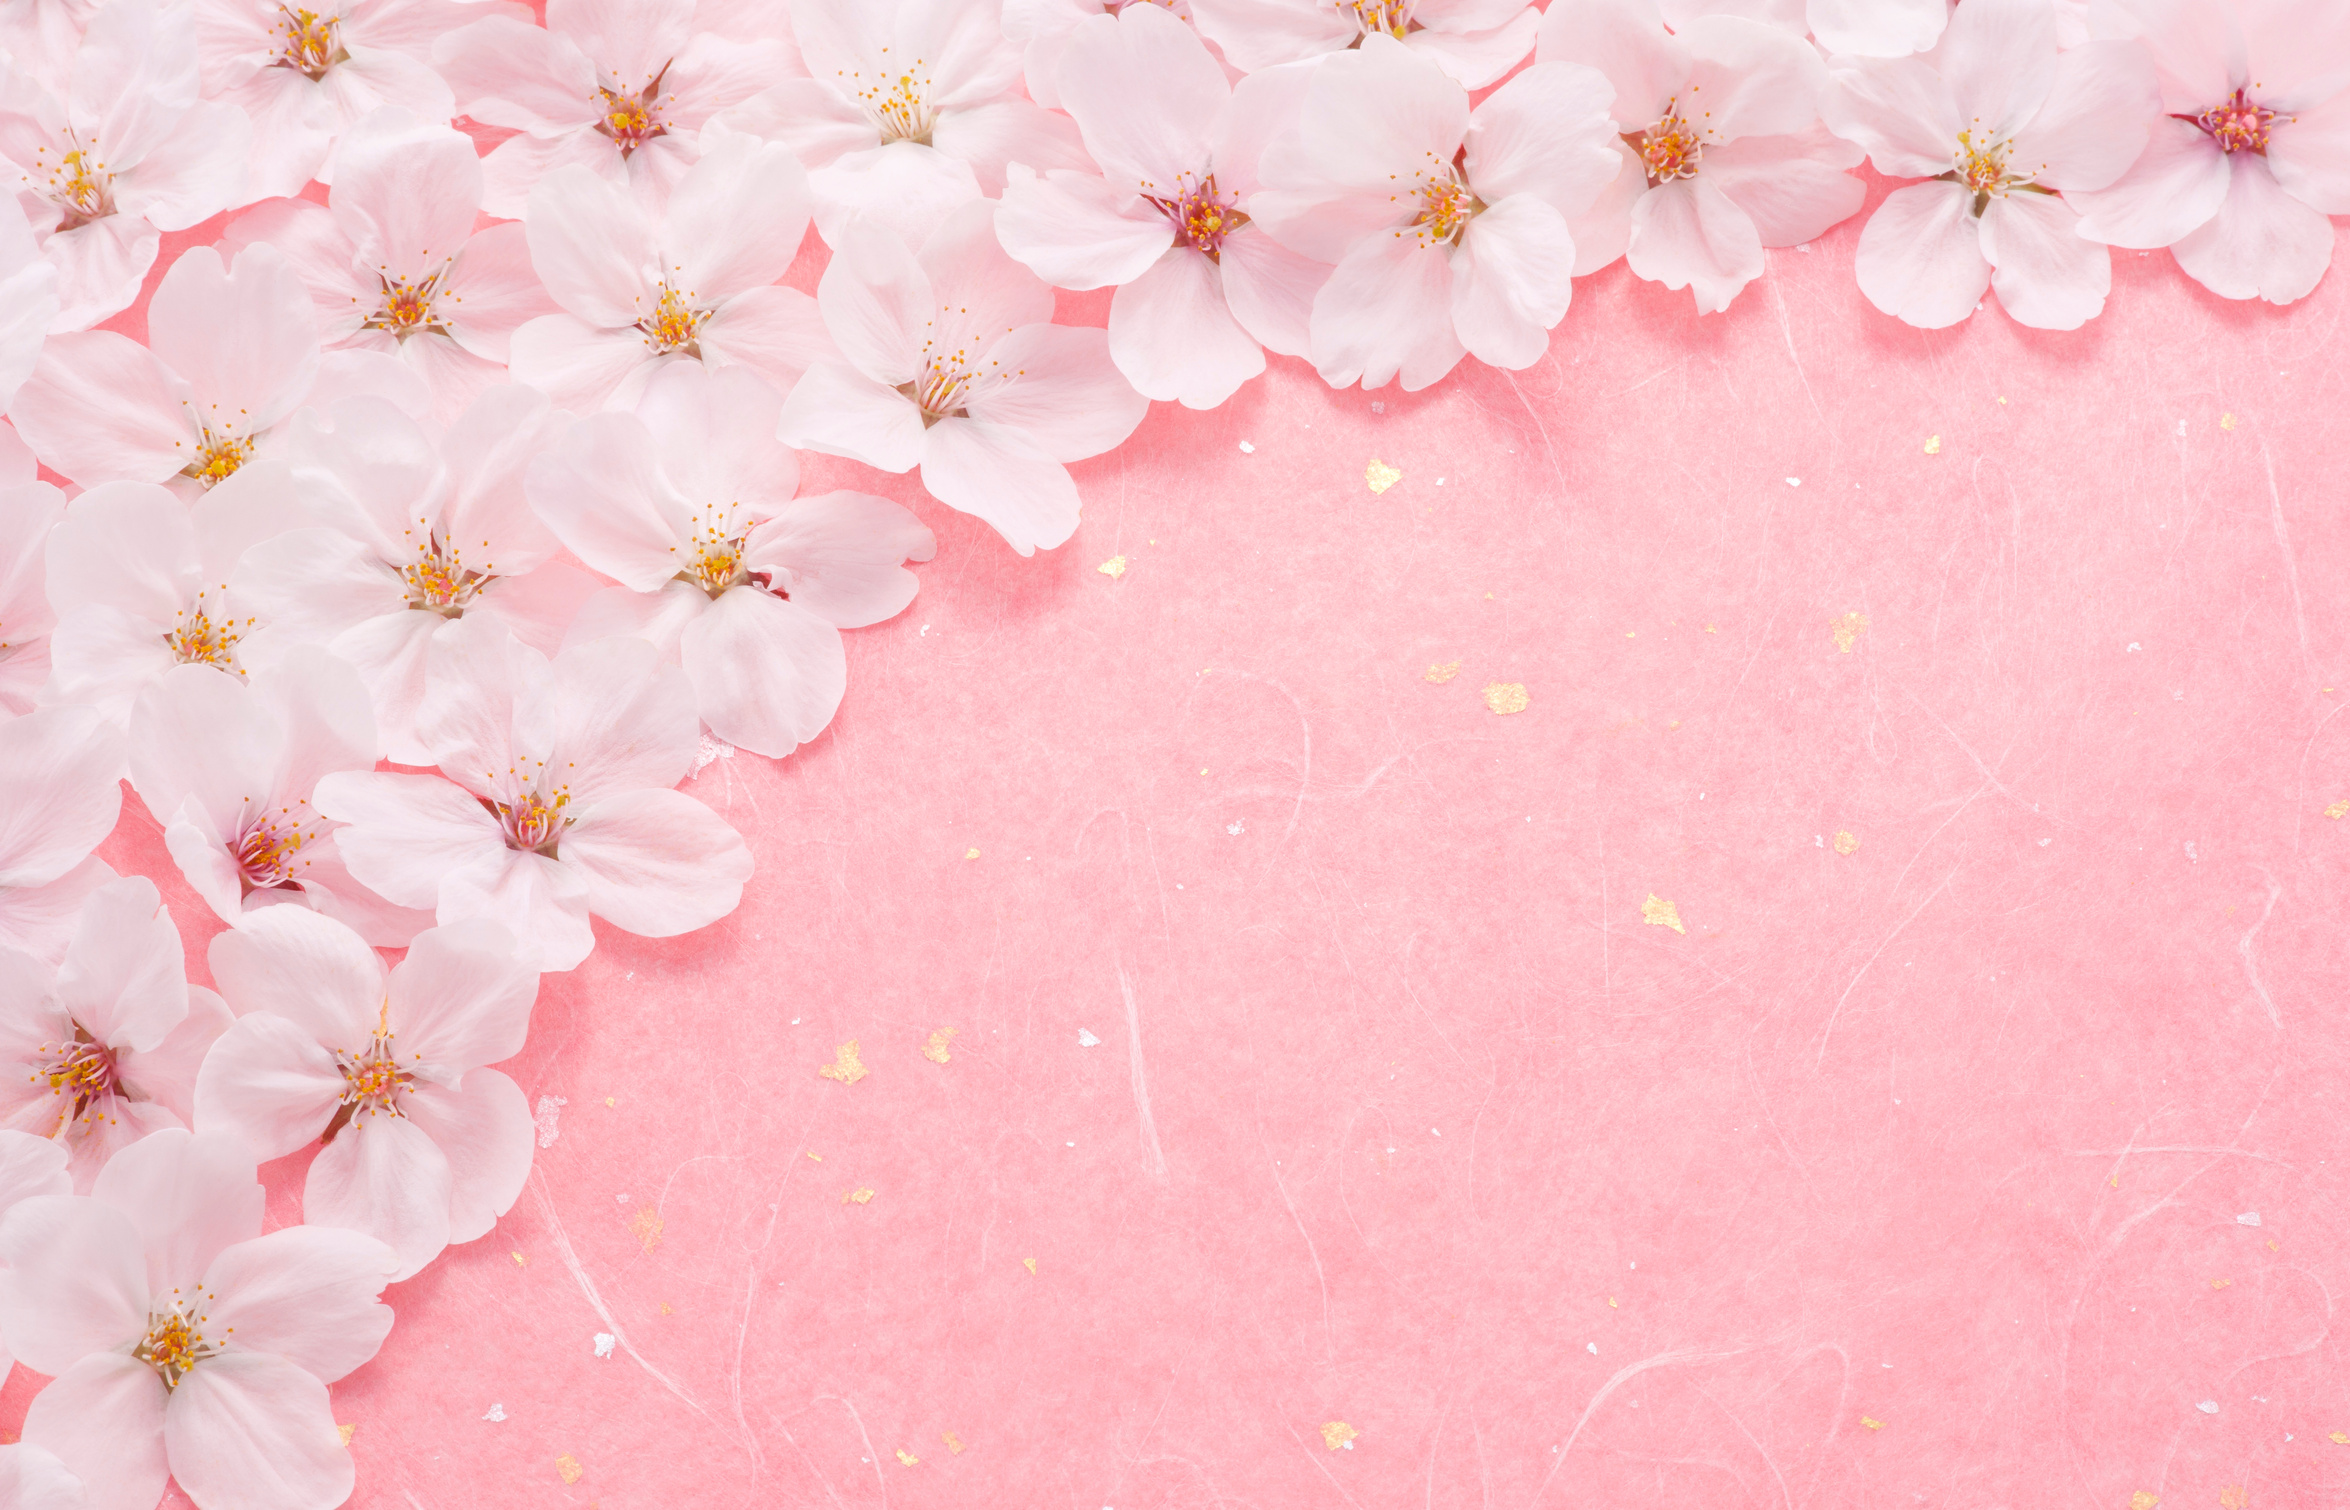 Cherry blossom on pink background